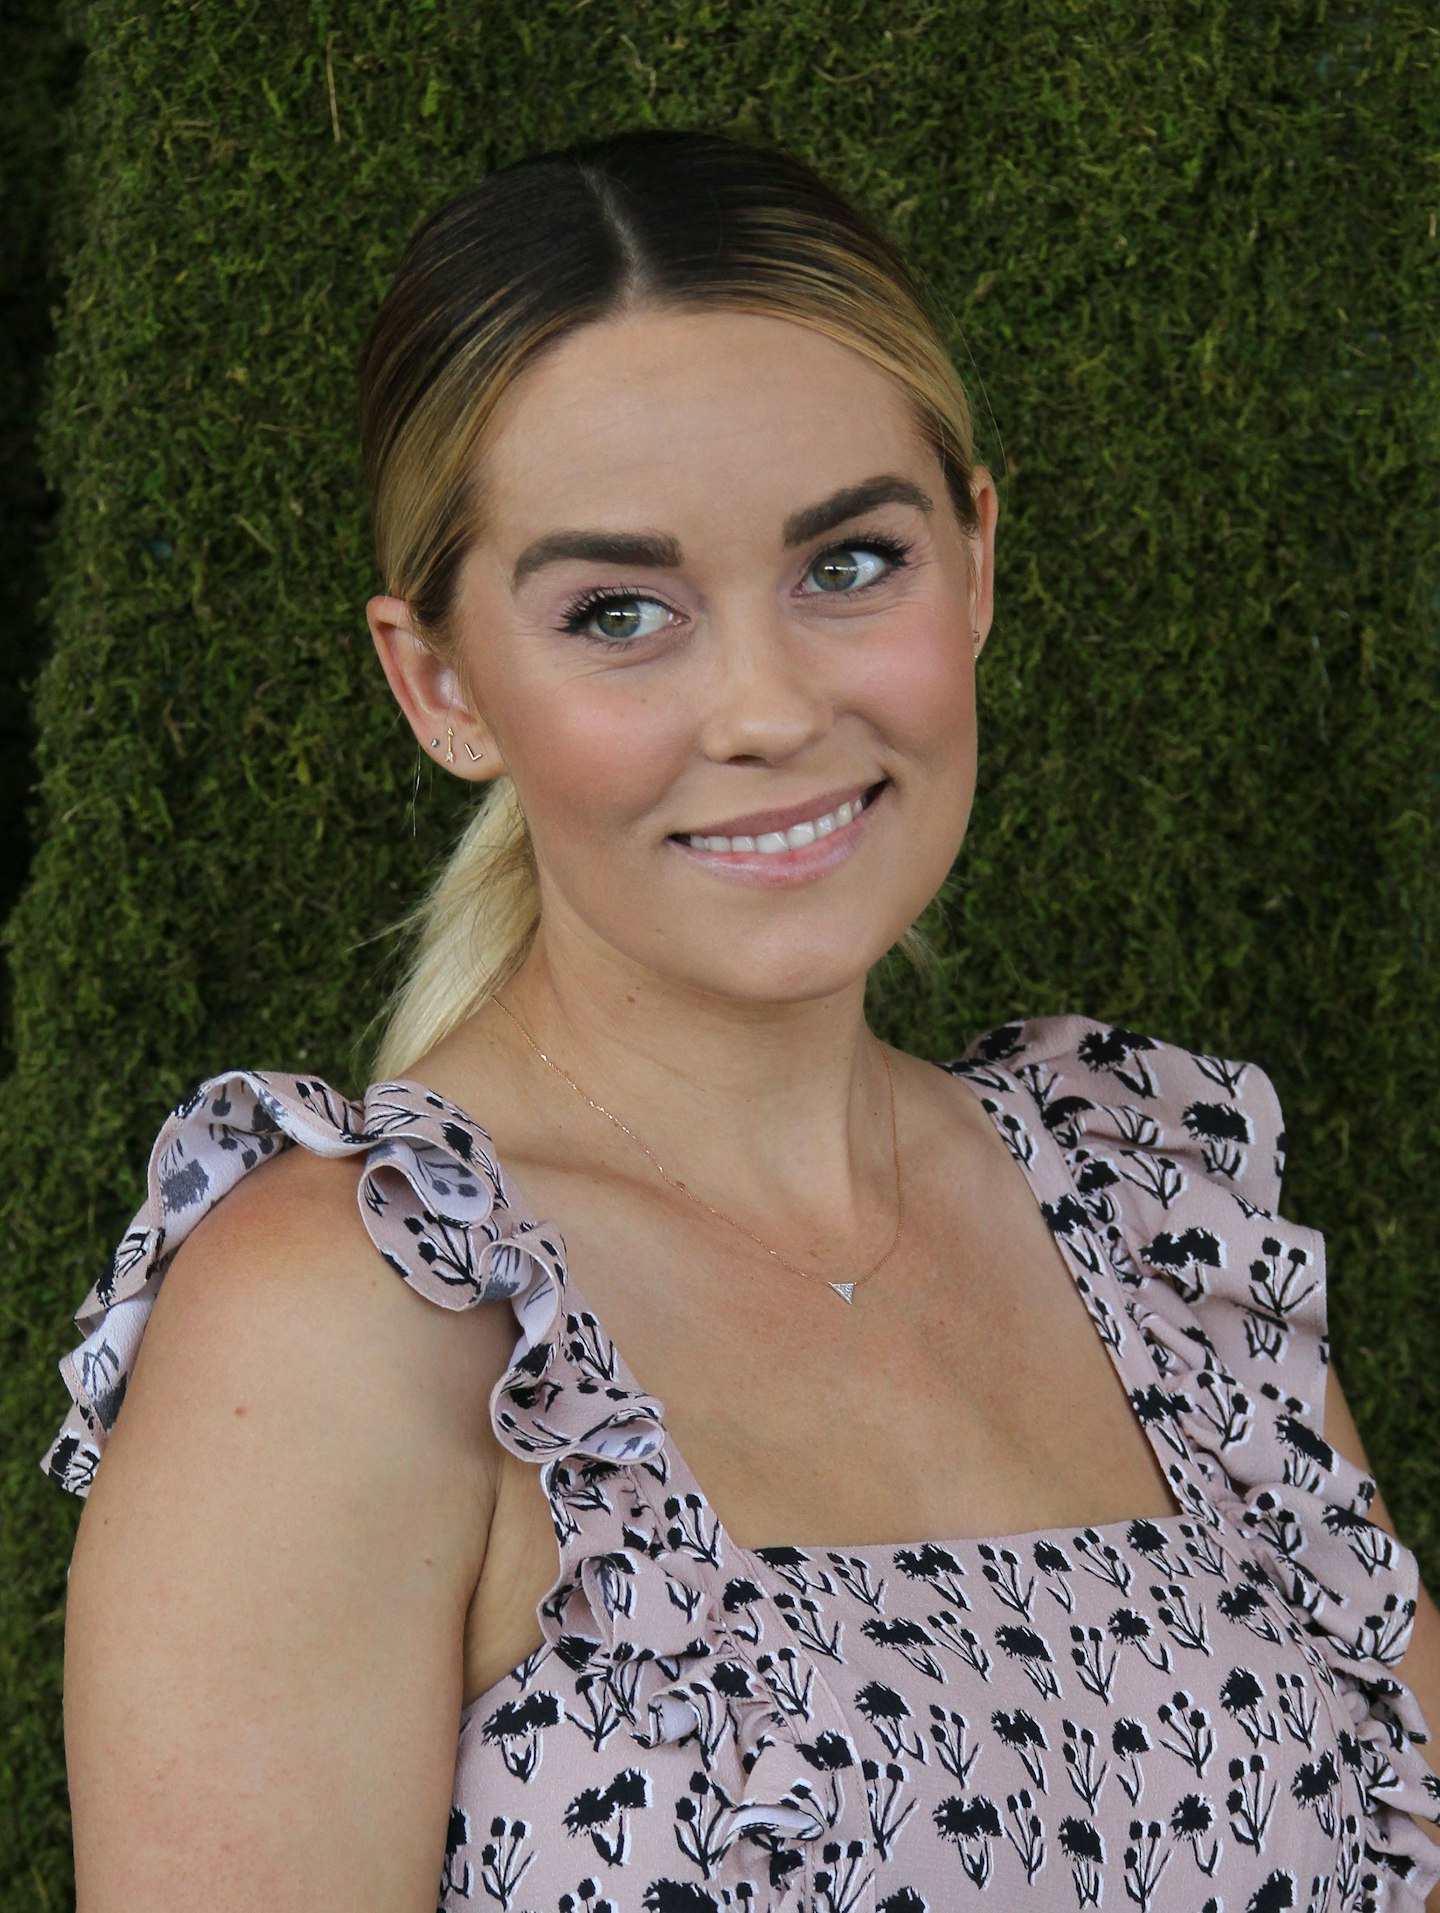 Lauren Conrad on ​The Hills​ and Not Going to Paris